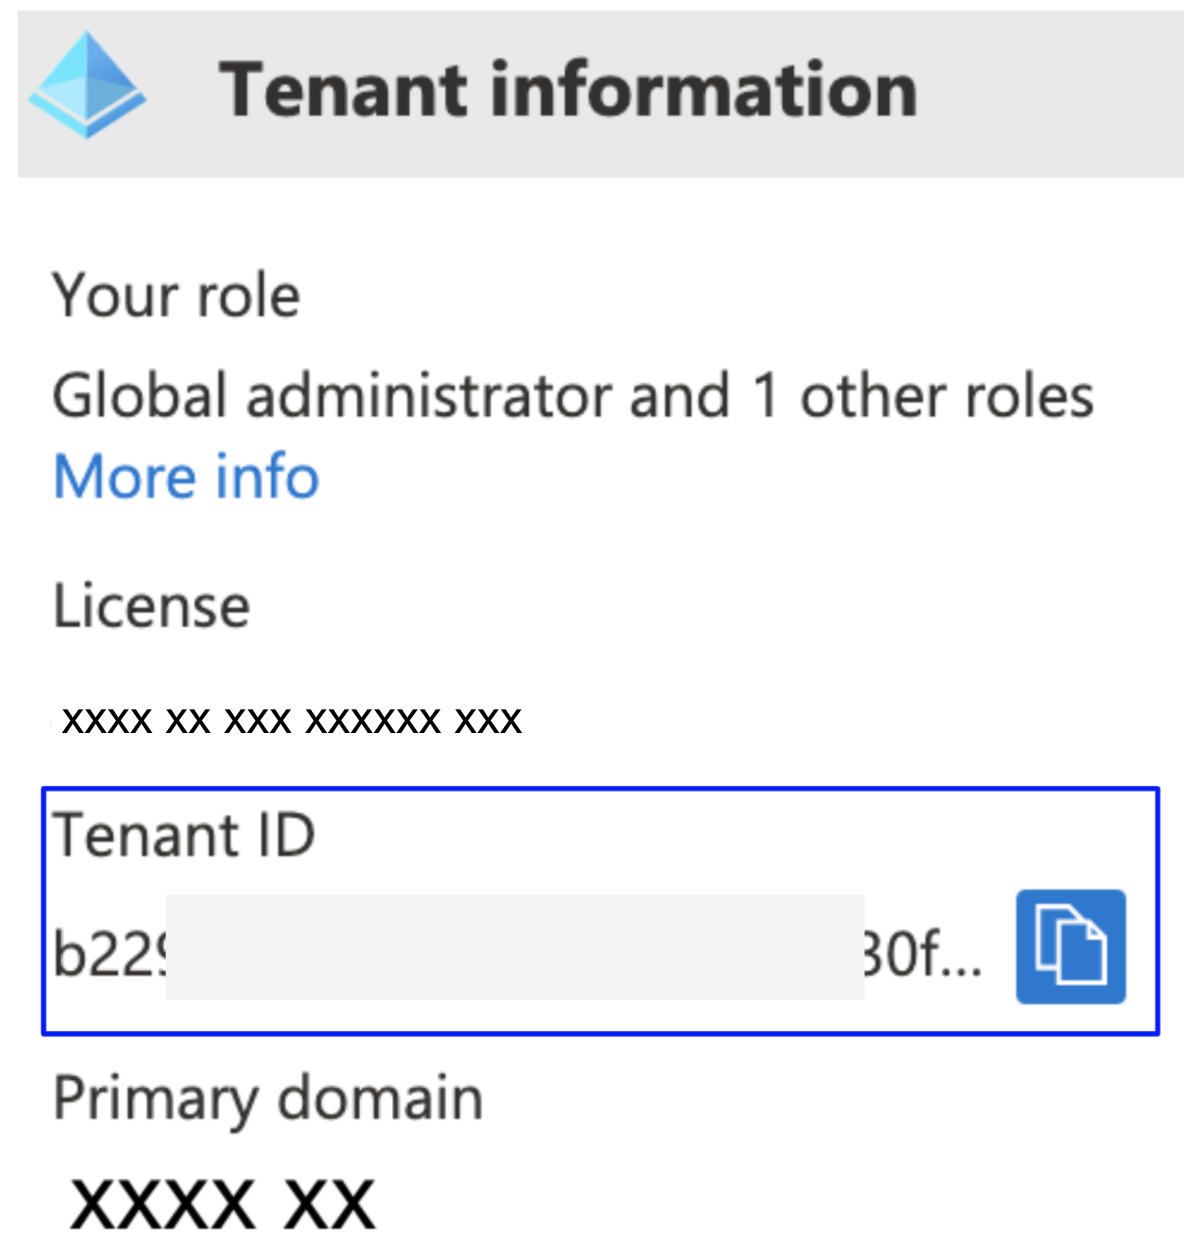 The Tenant Information section in Azure